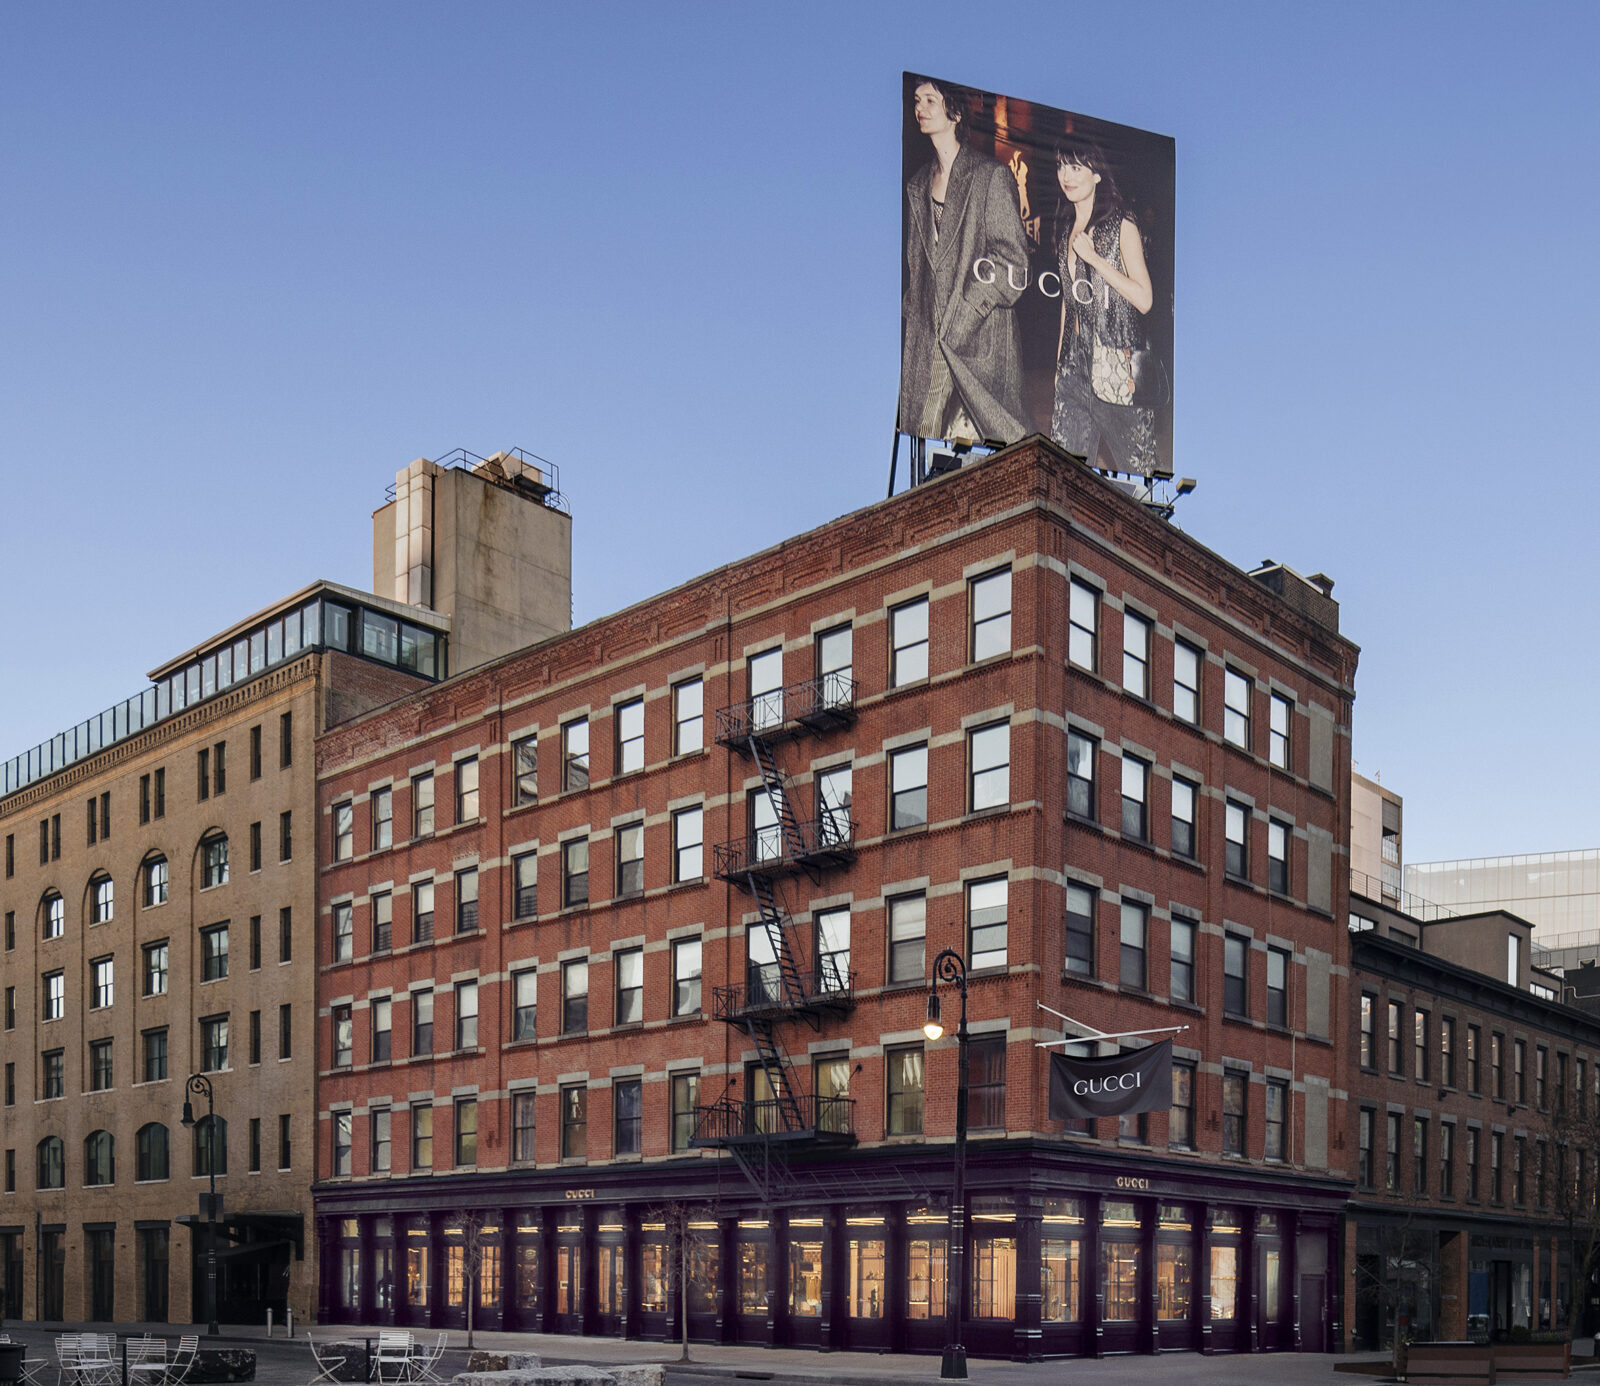 Gucci, Meatpacking District, New York